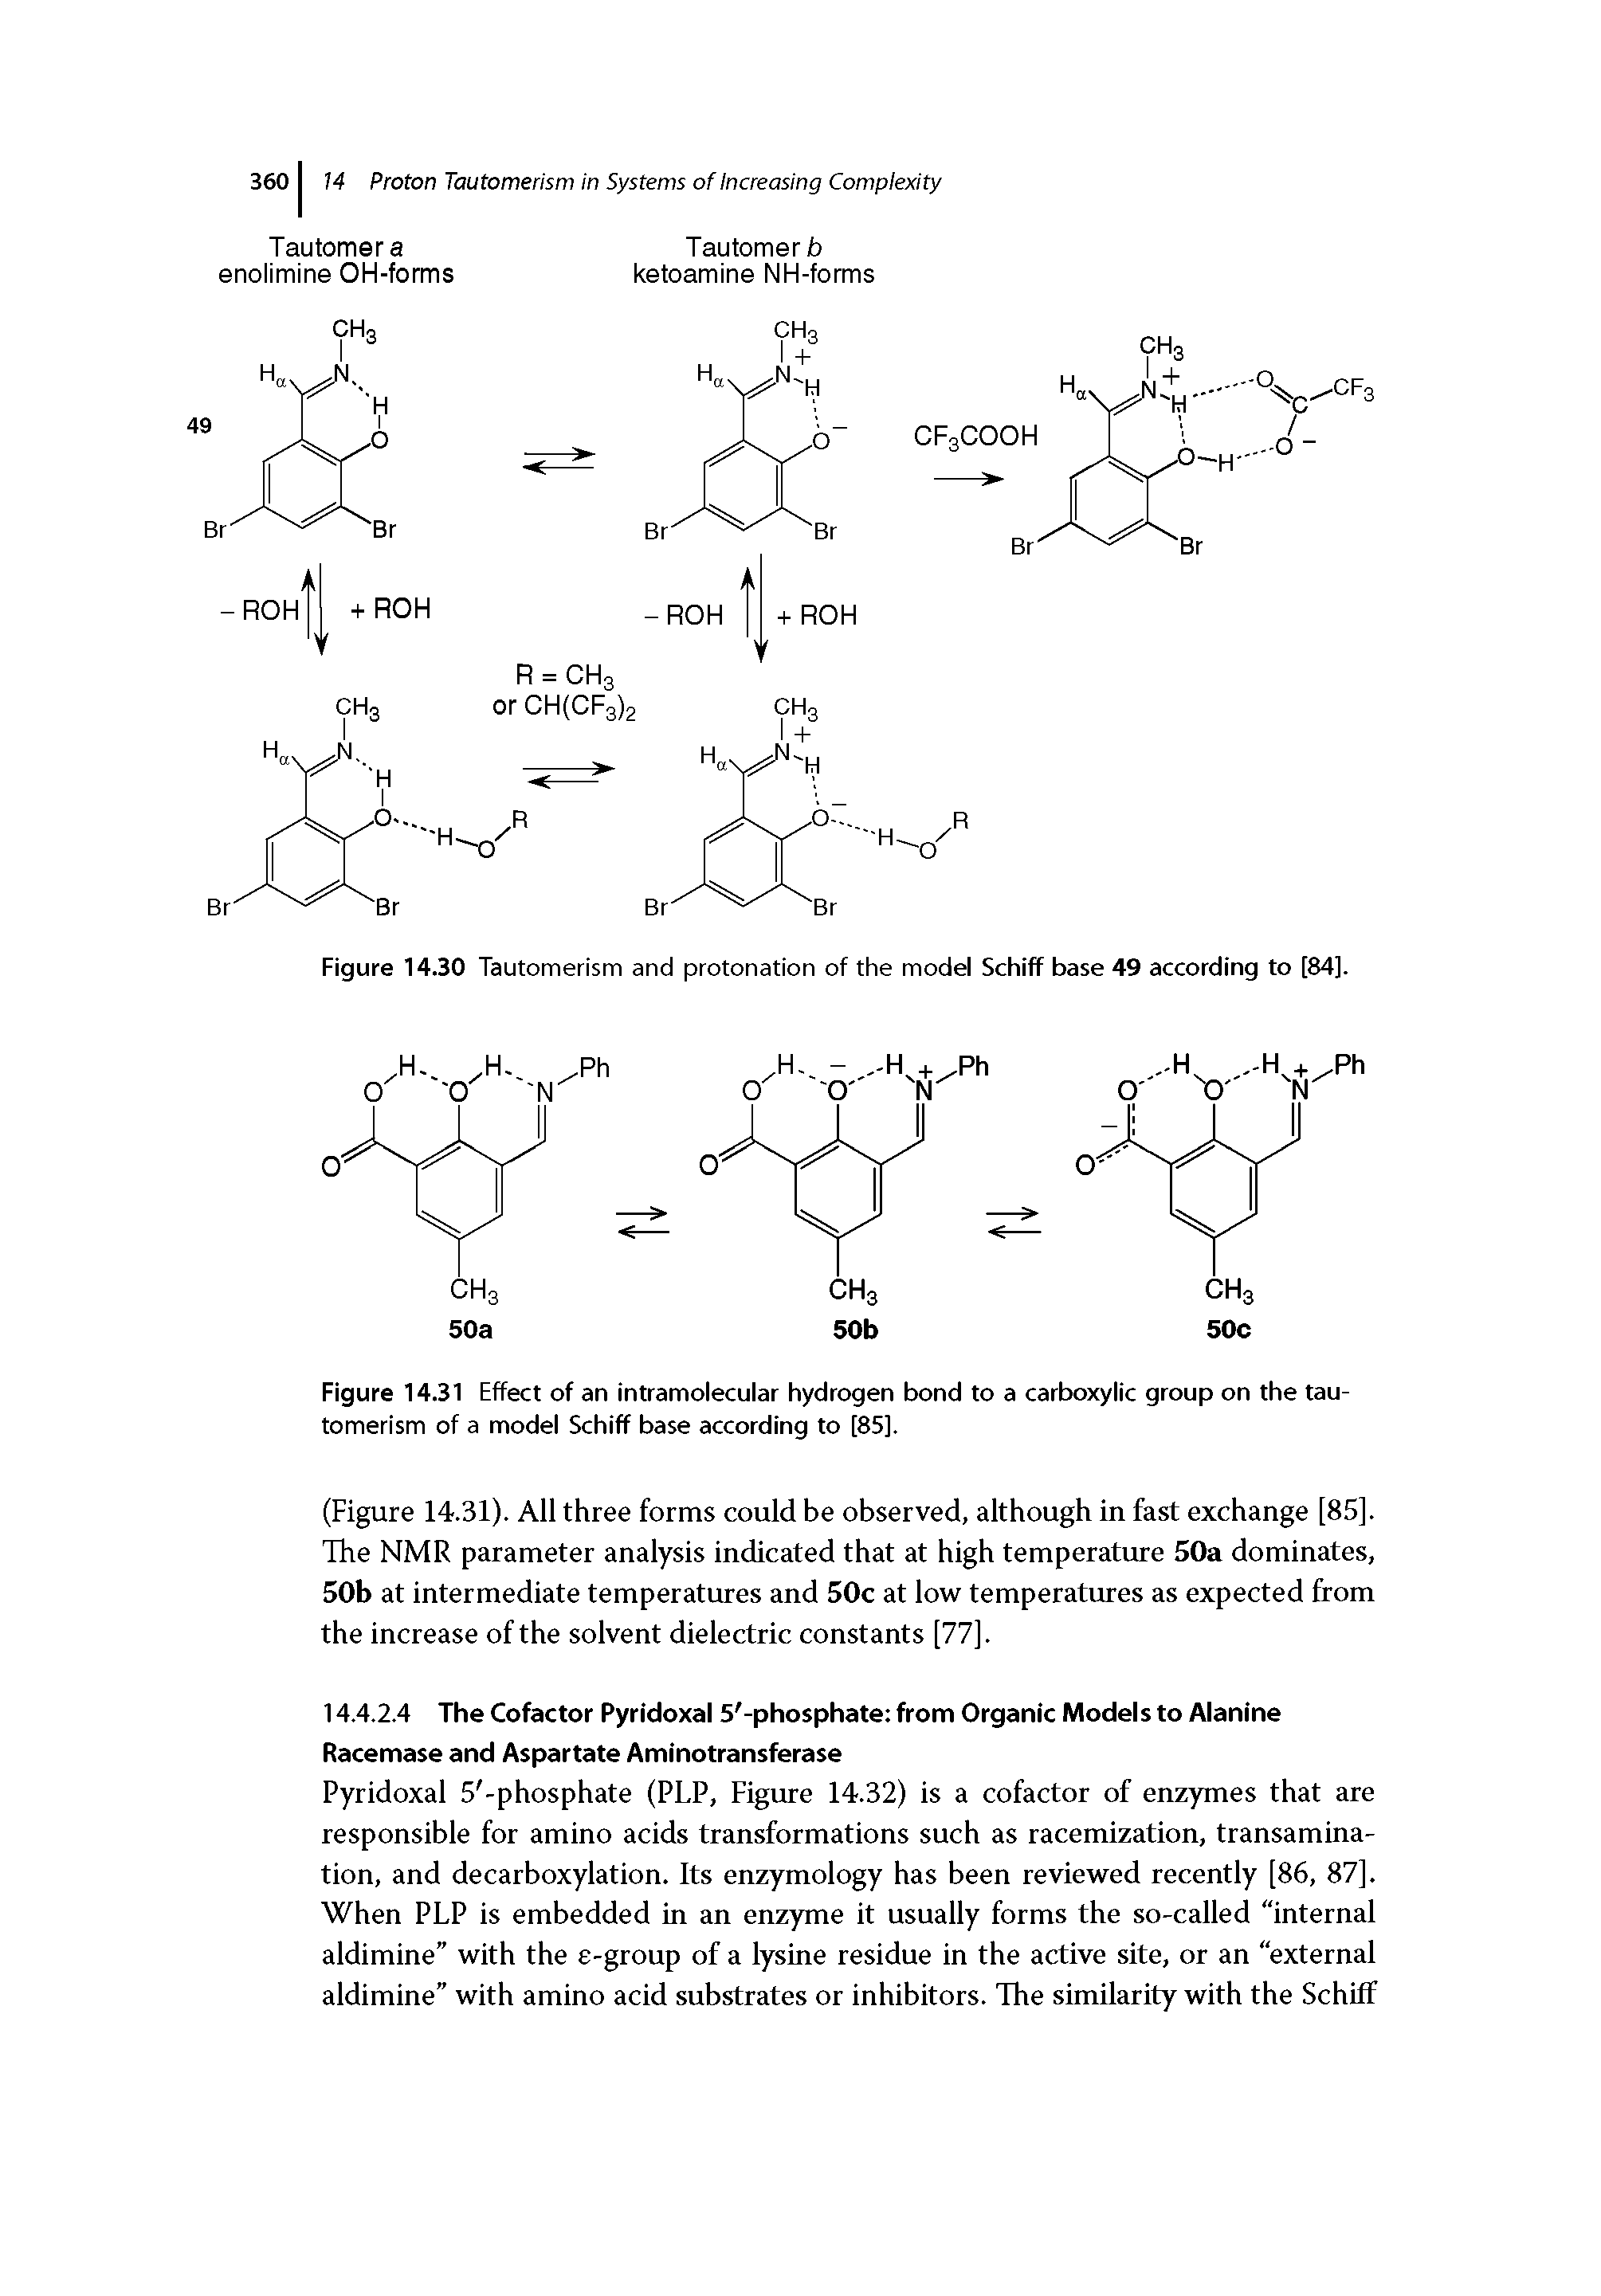 Figure 14.31 Effect of an intramolecular hydrogen bond to a carboxylic group on the tautomerism of a model Schiff base according to [85].